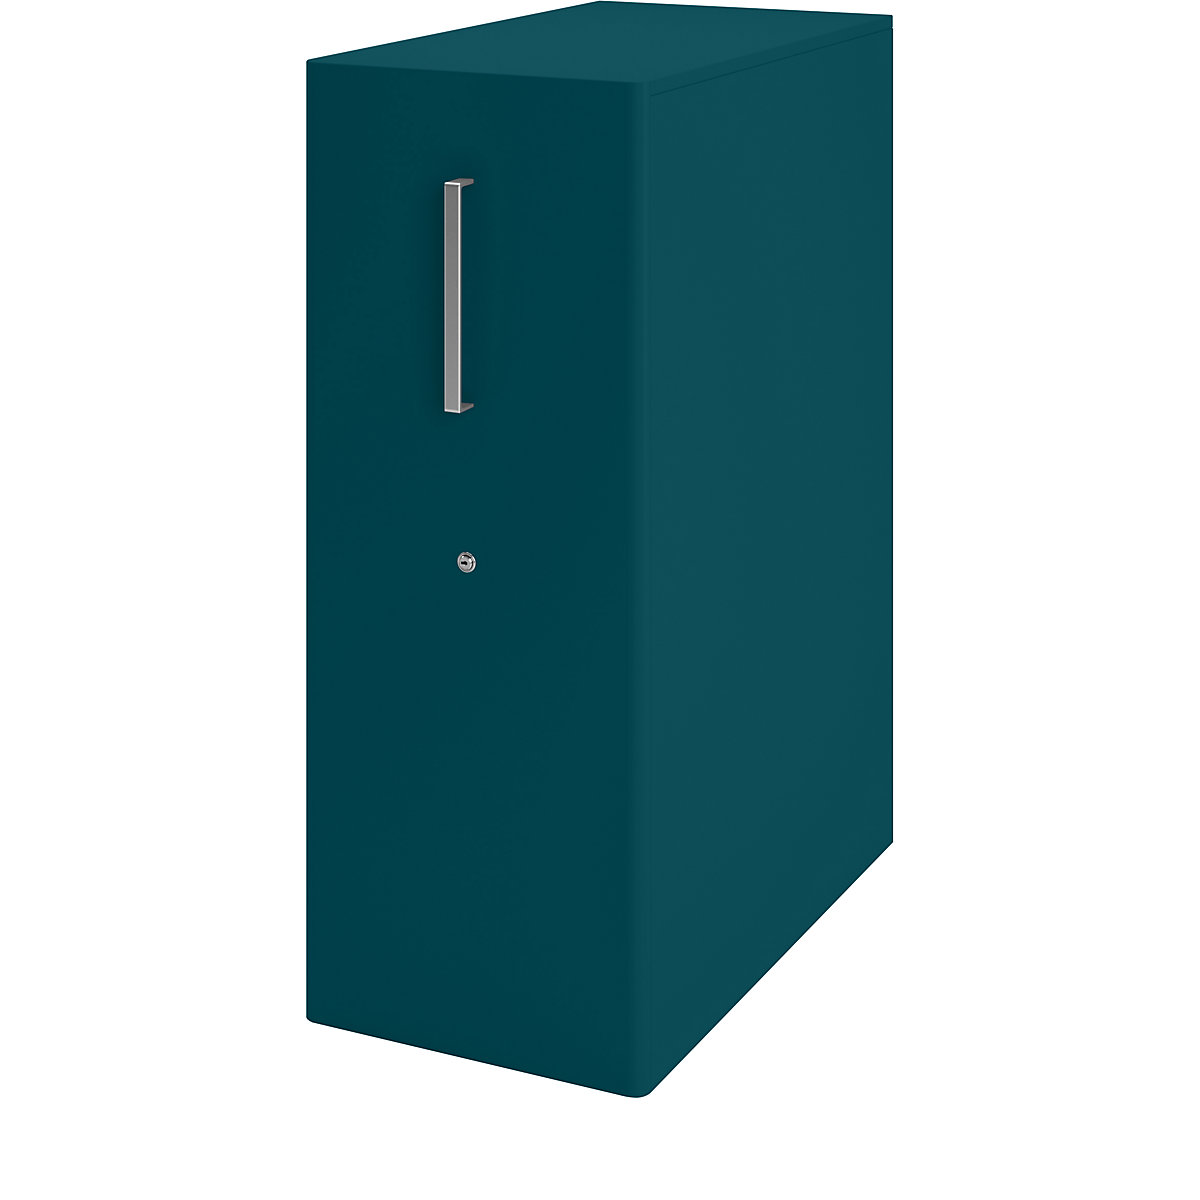 Tower™ 4 add-on furniture, with worktop – BISLEY, for the right side, 3 shelves, ocean blue-14